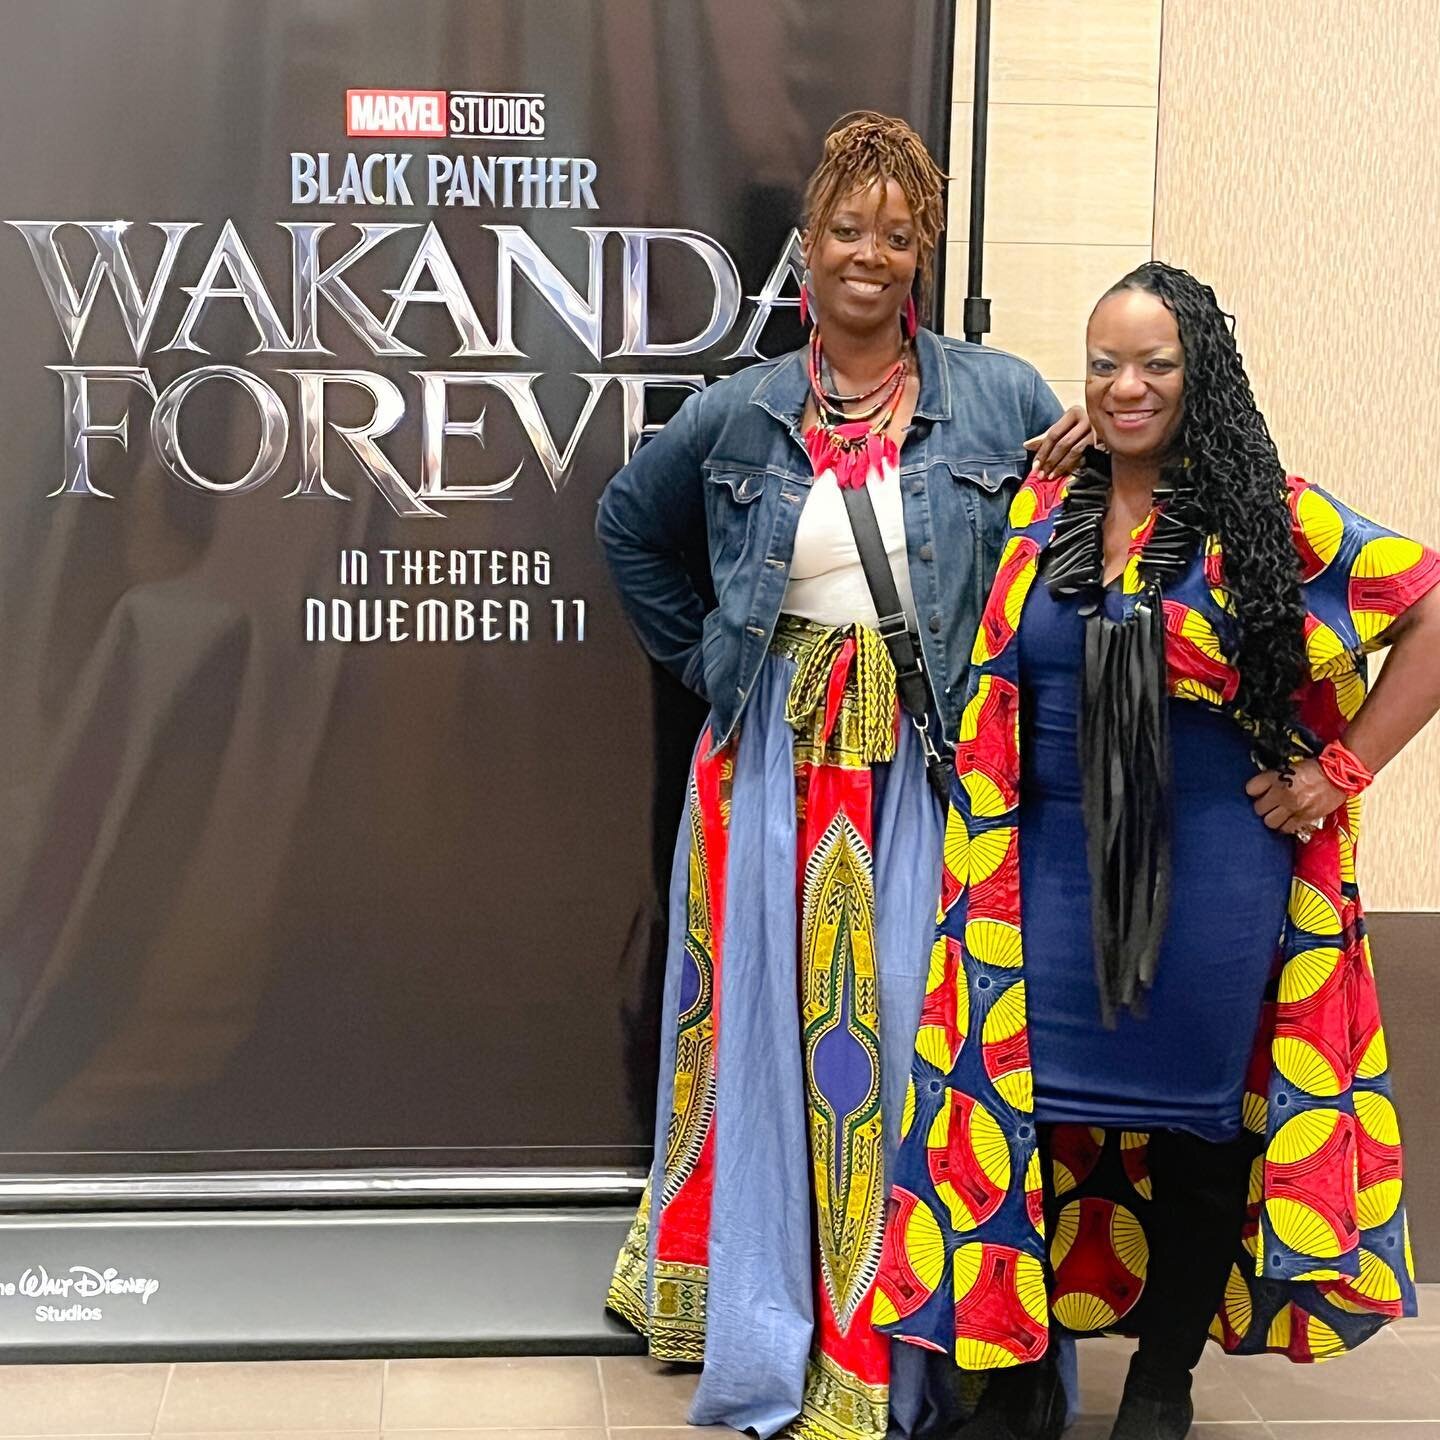 Had a great time seeing #WakandaForever with the fam on opening night. I appreciate the film's moving tribute to beautifully brilliant actor @chadwickboseman &amp; I love the woman power/ #feminist/ #womanist themes. Last but not least, costume desig